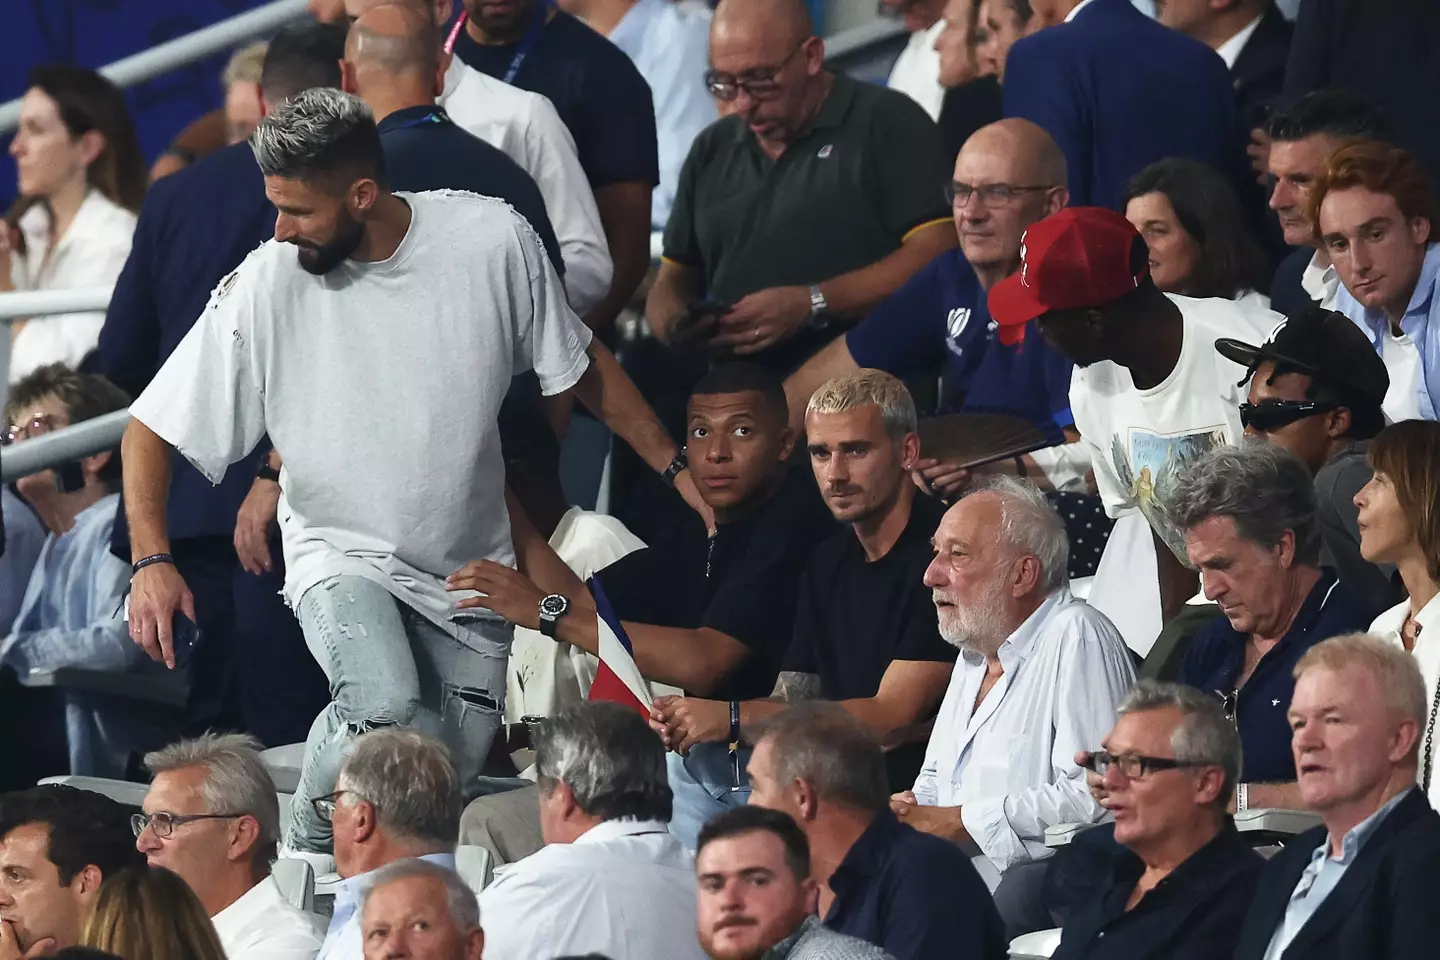 Kylian Mbappe watched France beat New Zealand at the Rugby World Cup. (